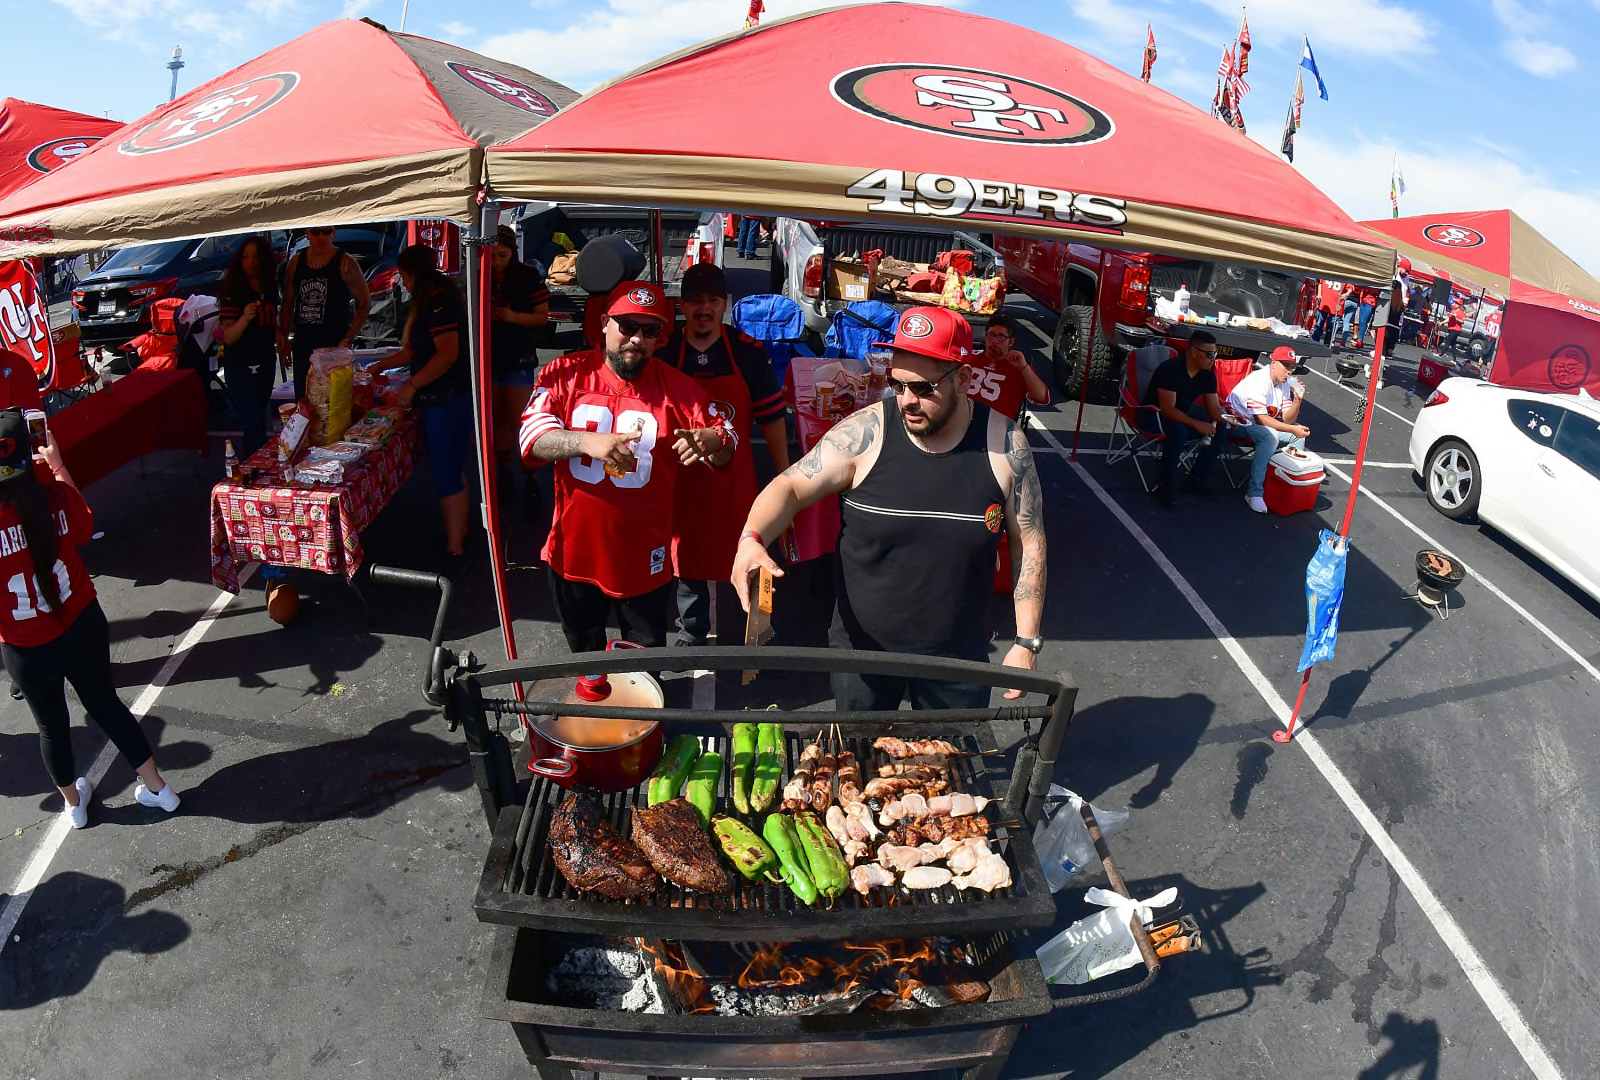 The 10 worst tailgate foods 49ers fans should hate (but don't) - Page 5